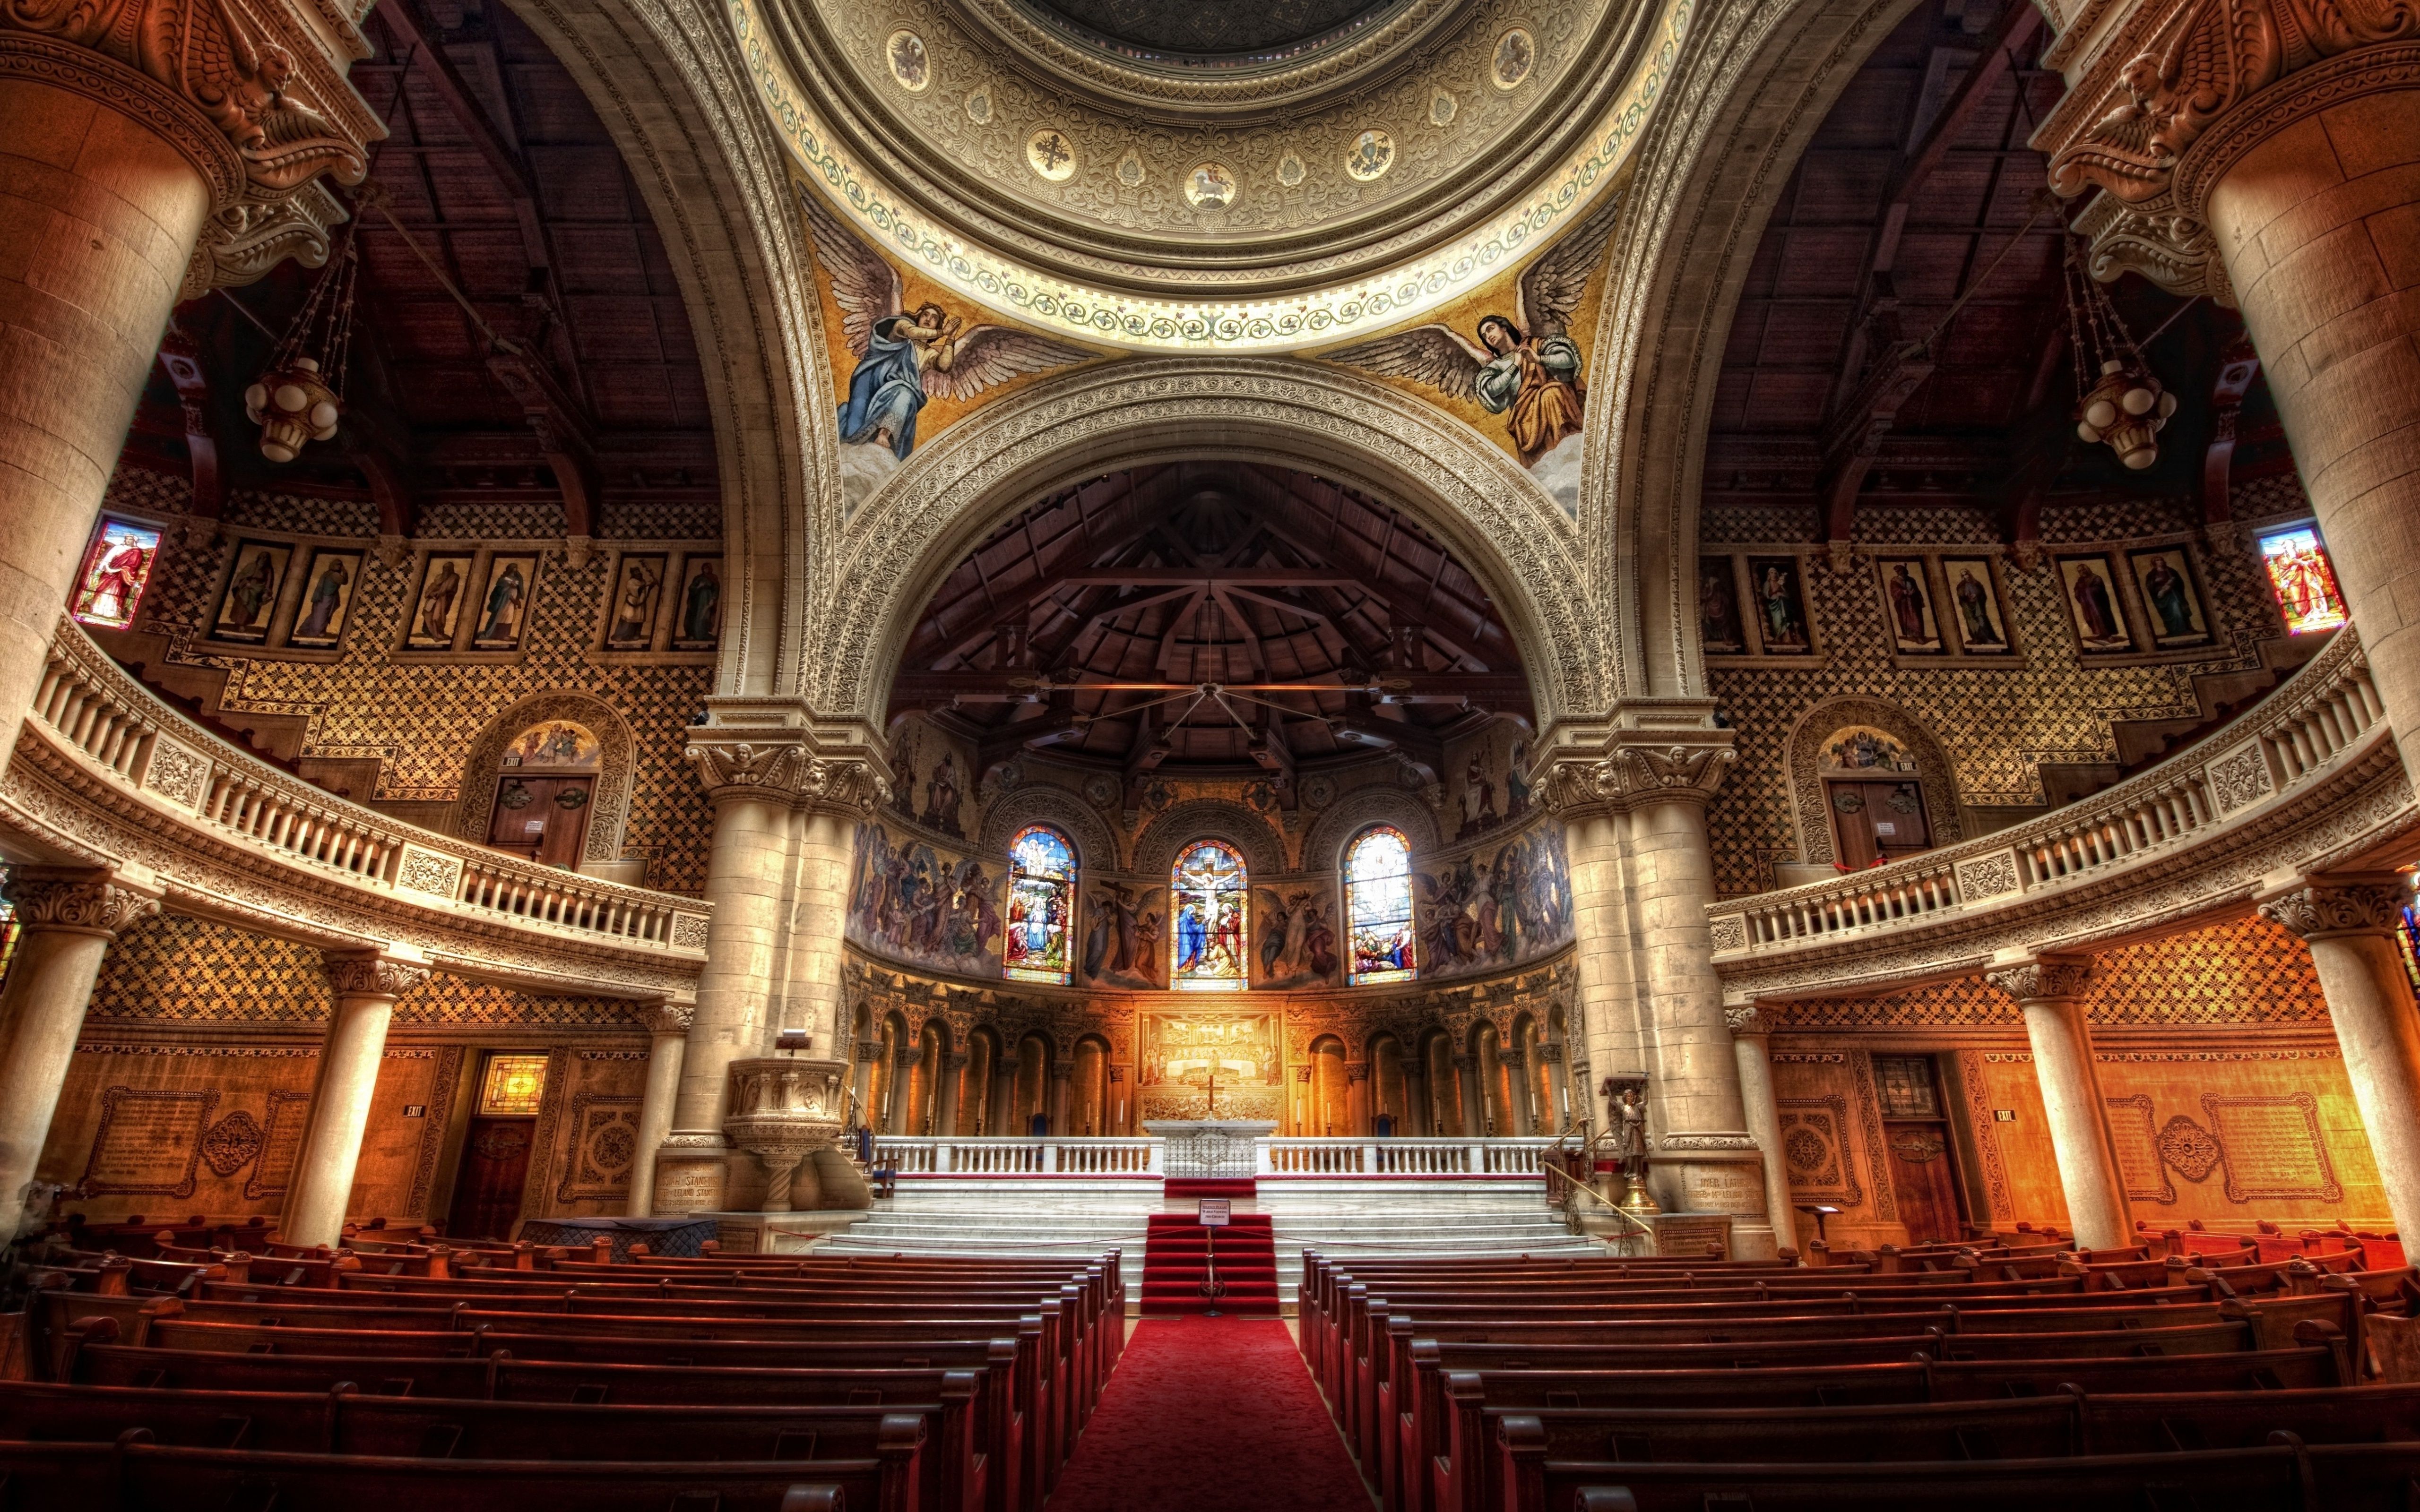 Mobile wallpaper: Stanford Memorial Church, Stanford Church, Stanford, Churches, Church, Interior, Cathedral, California, Religious, 348228 download the picture for free